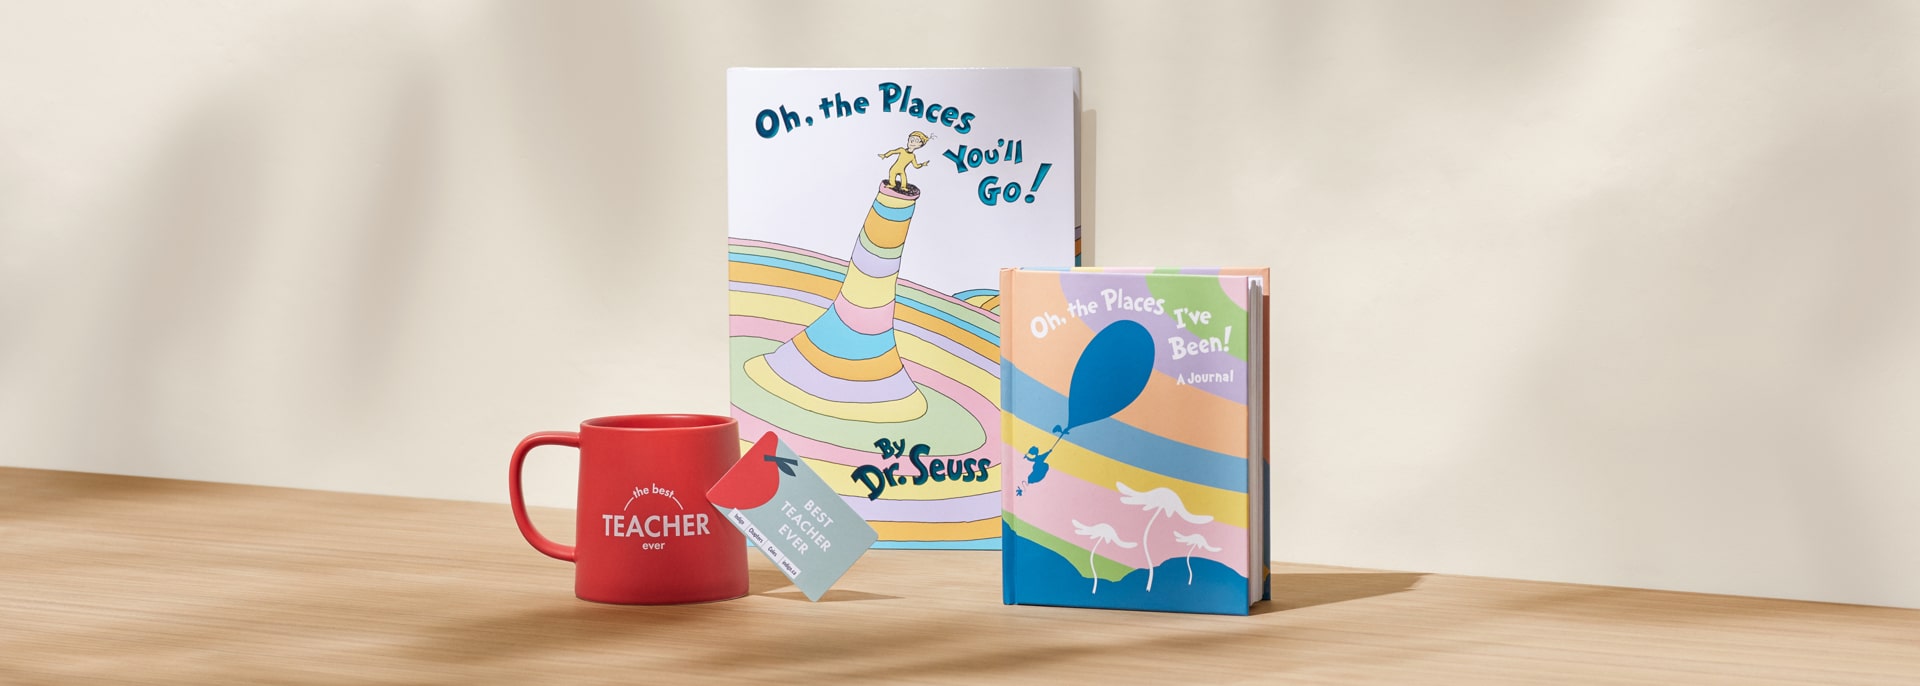 Teacher appreciation gifts such as a mug, gift card and Dr. Suess books.